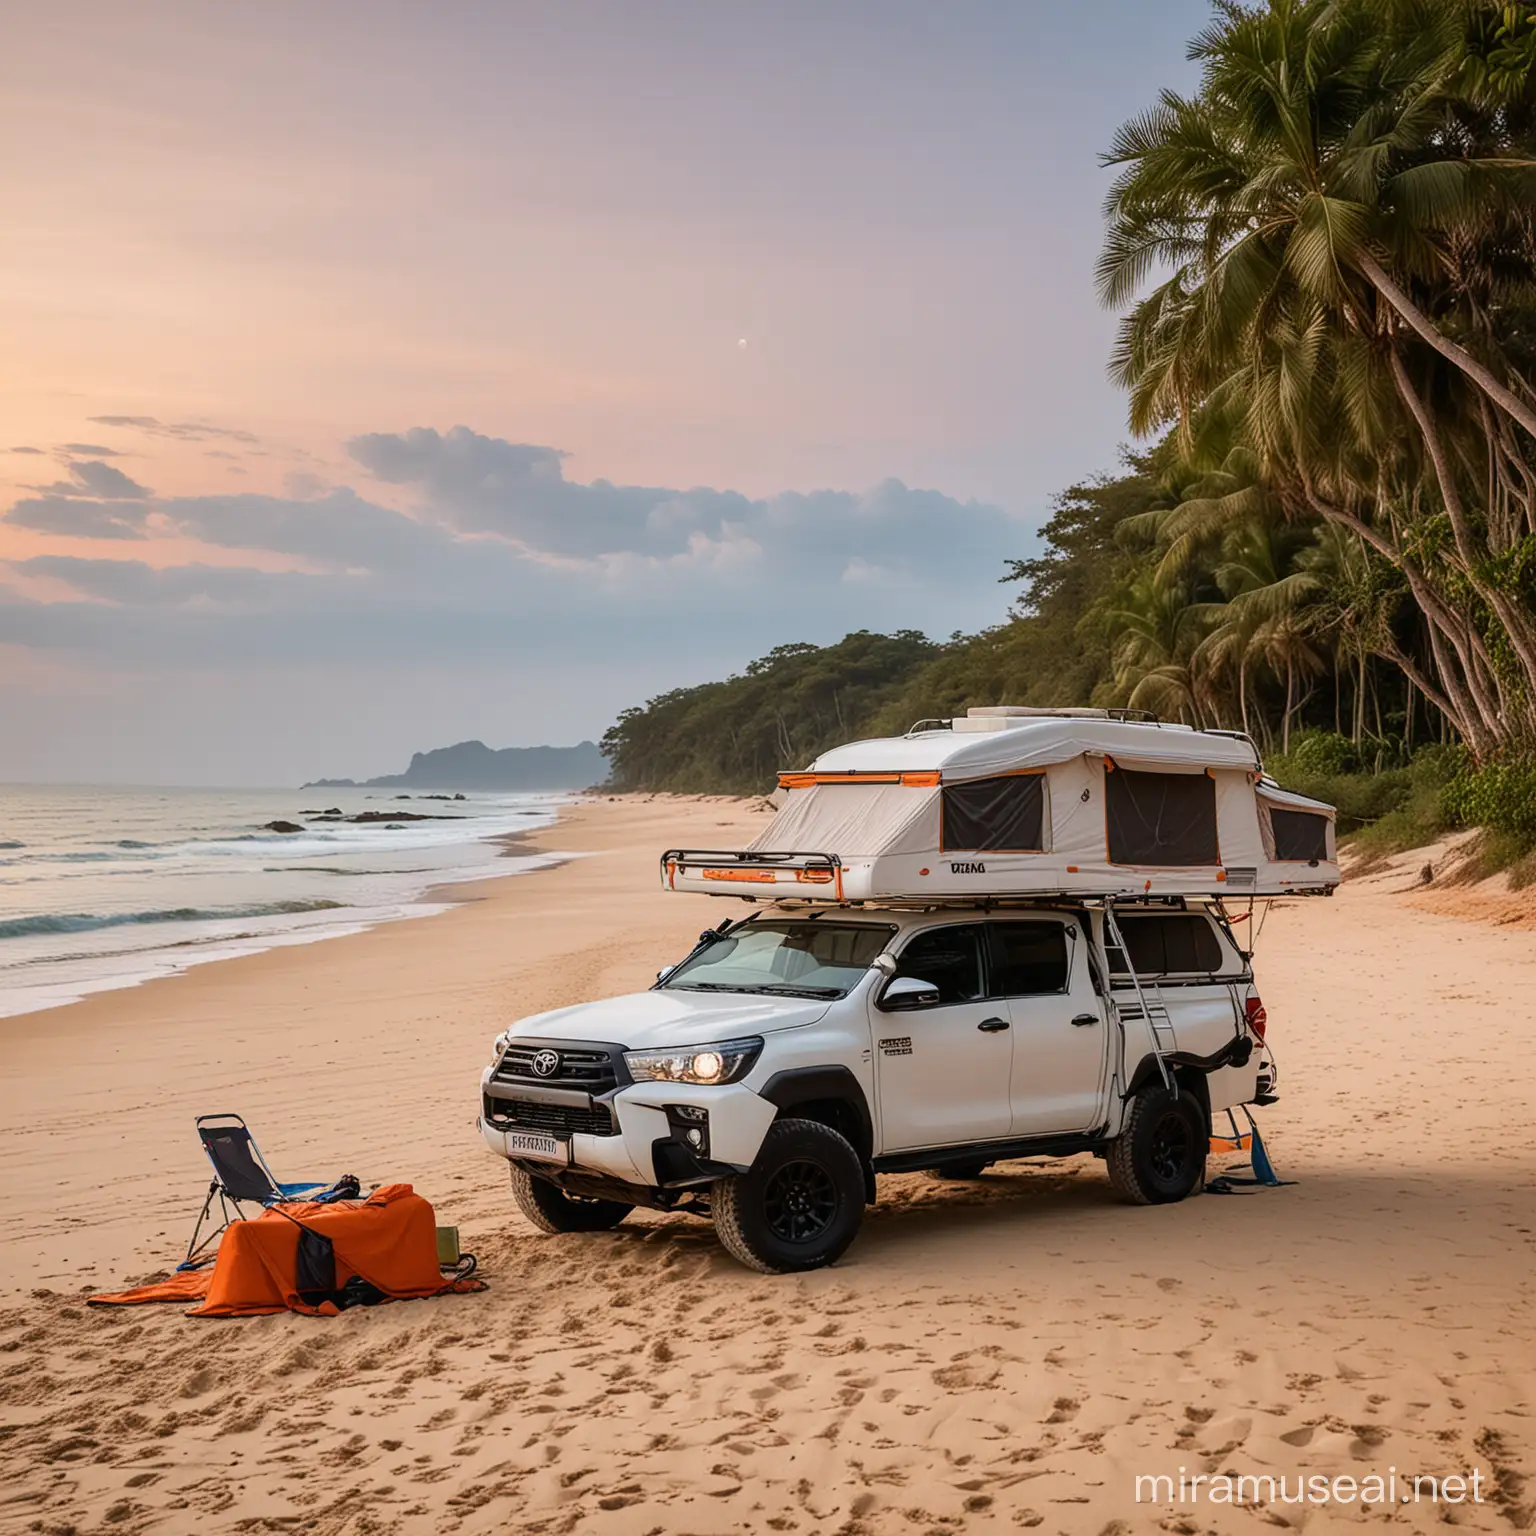 A white Toyota Hilux with an adventurous motorhome conversion, with an tent nex to it is perched on the soft sands of a secluded Thai beach at dusk. The bold orange 'Indie Campers' logo with thai elements on the side of the truck complements the scene of untamed beachside wilderness